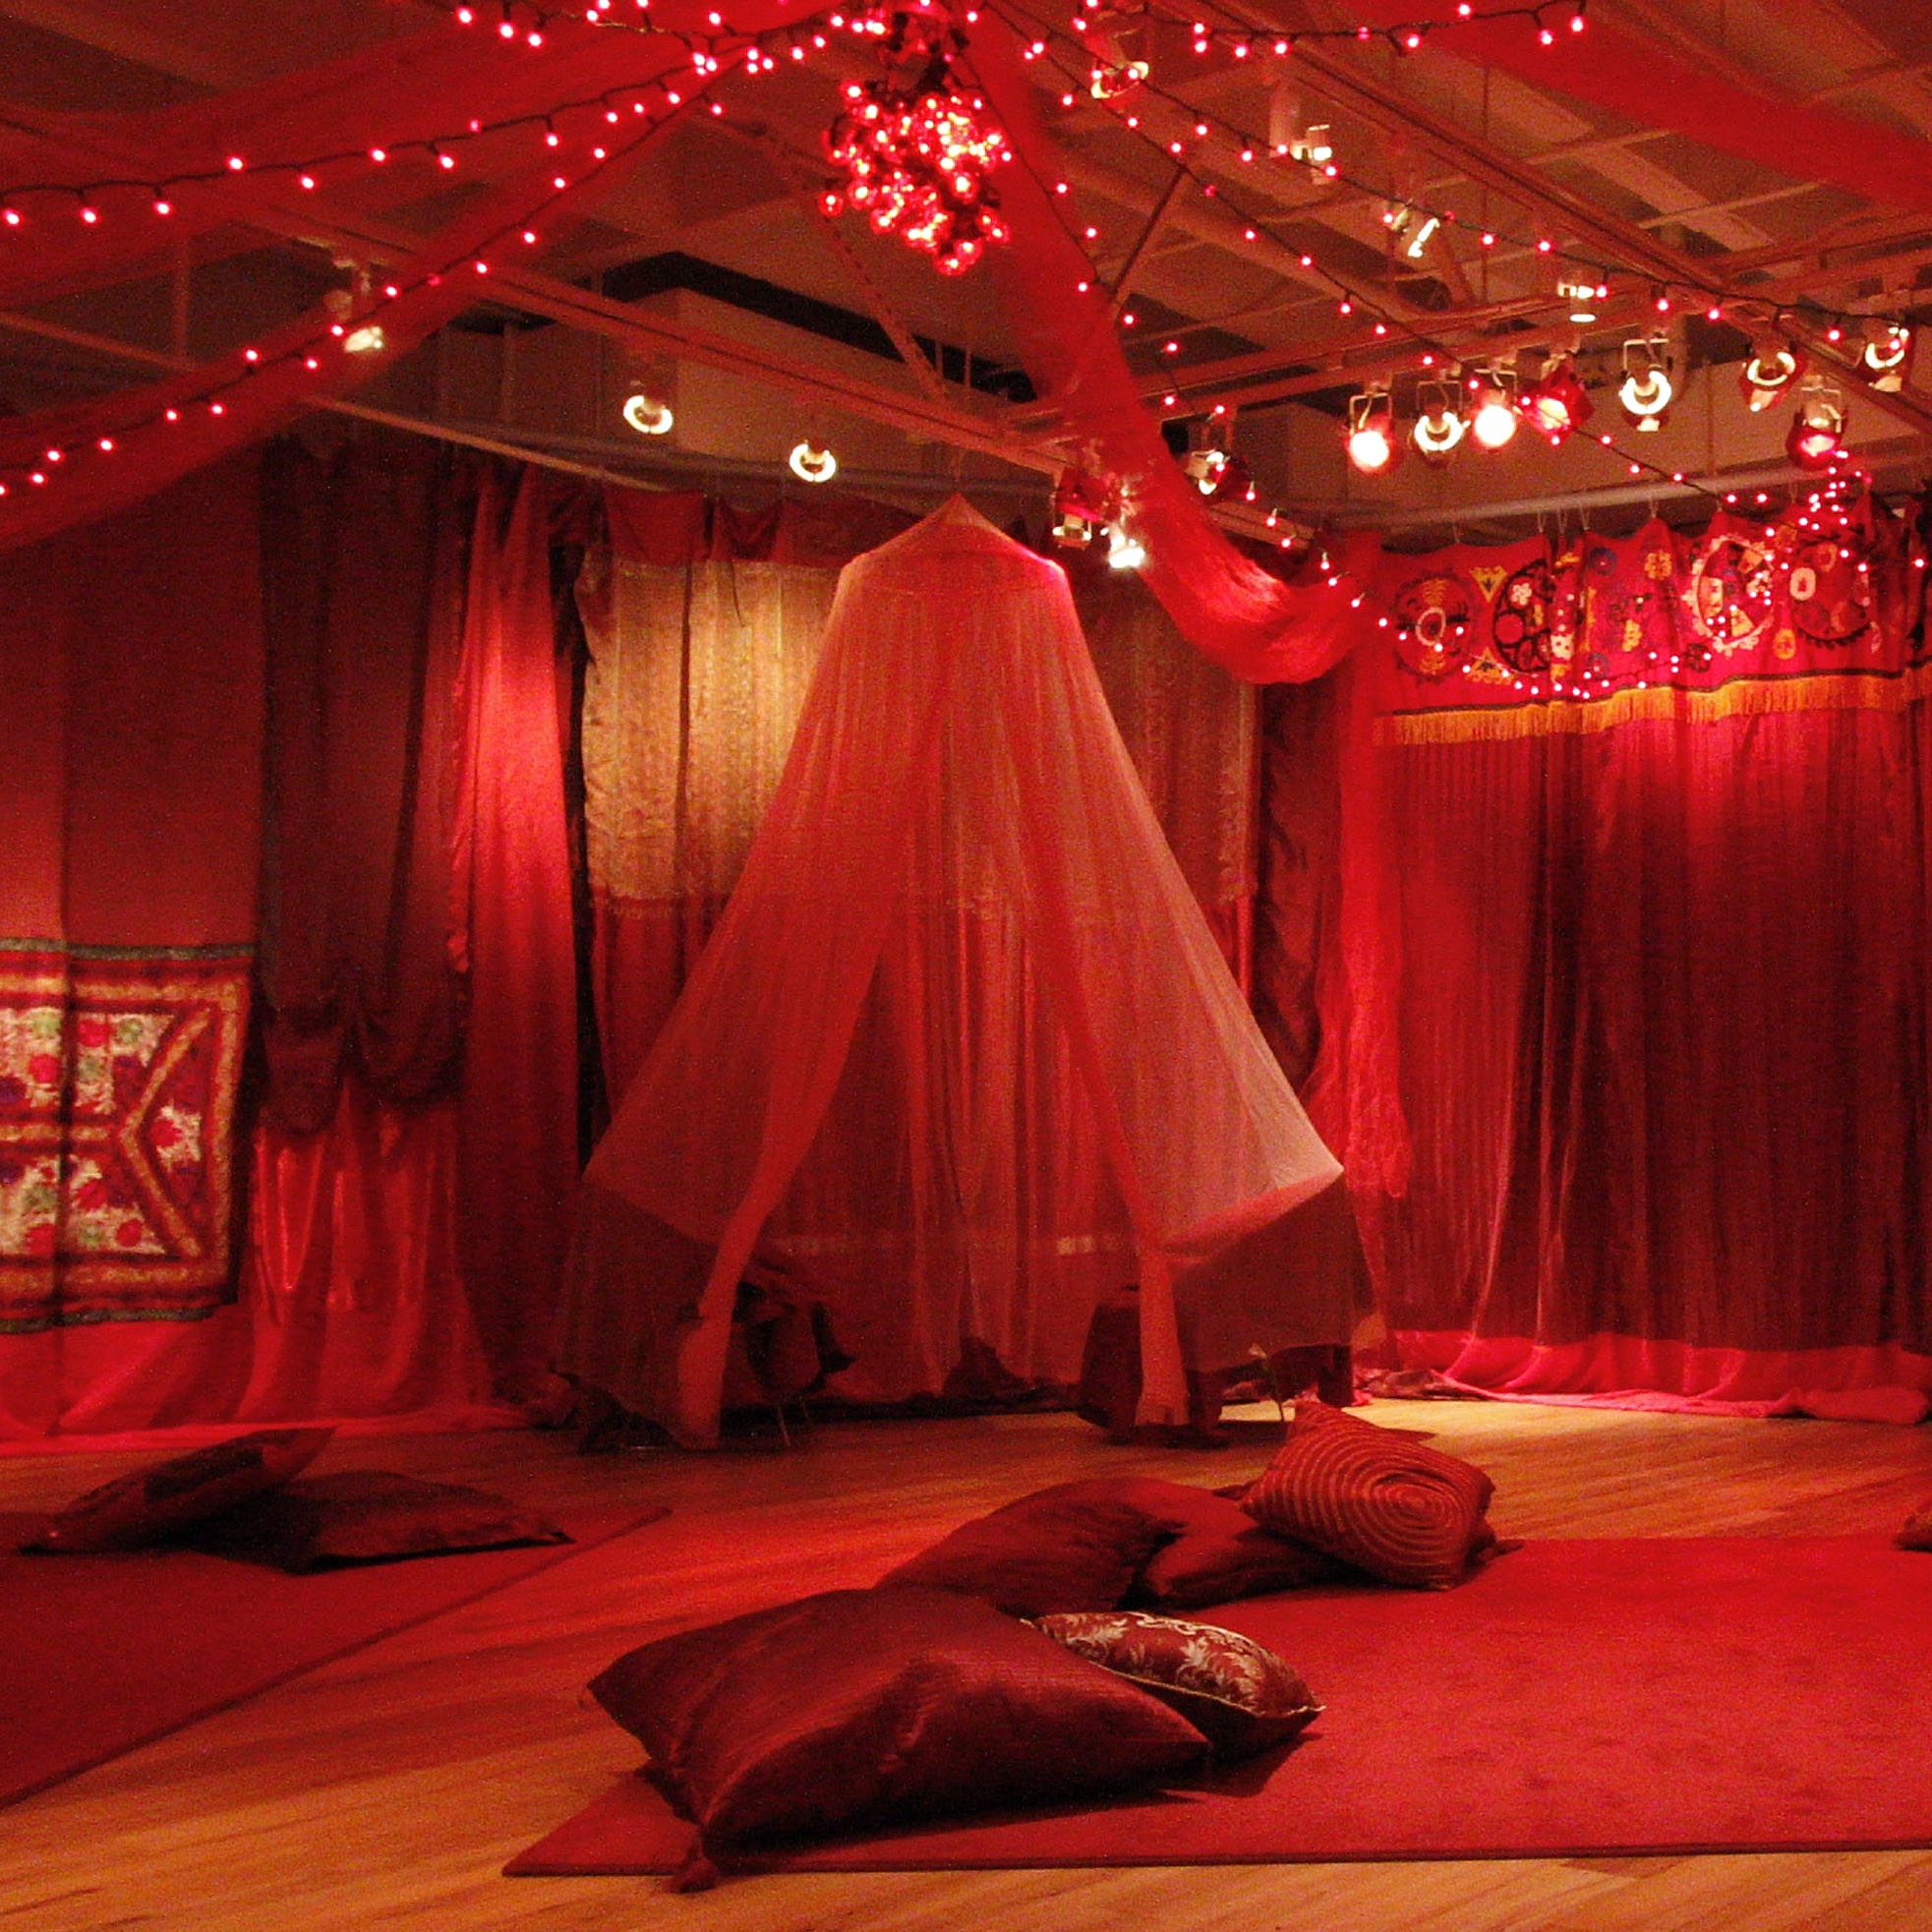 Red Tent